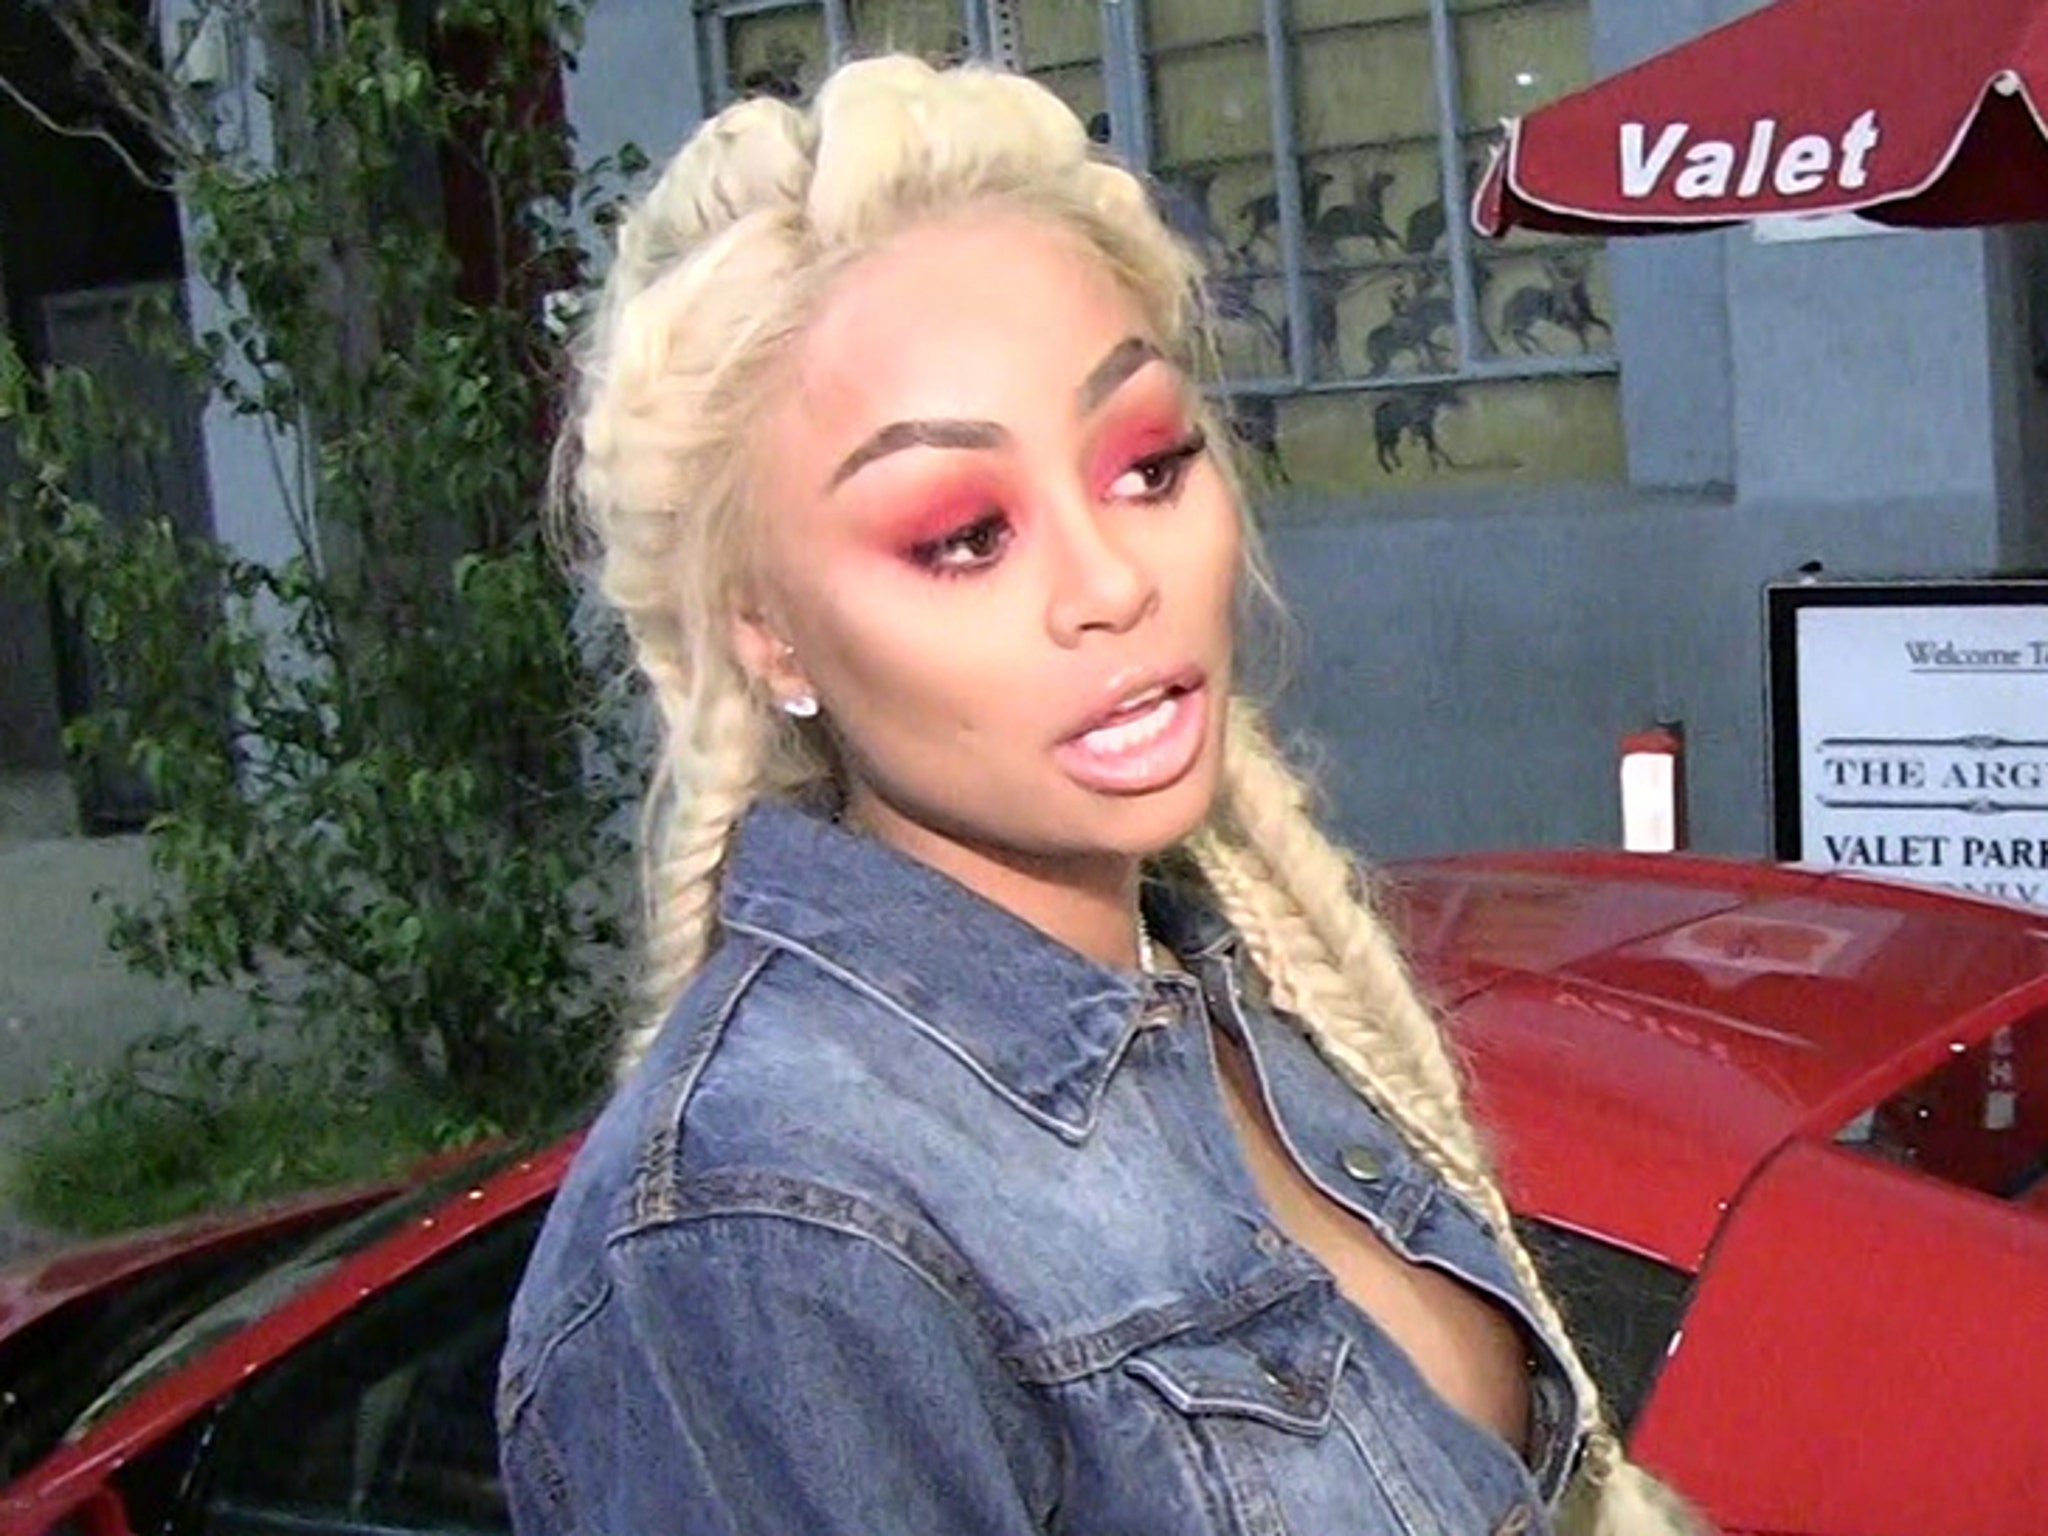 Blac Chyna Sex Tape Porn - Blac Chyna Sex Tape Leaks, She's Calling in Cops (UPDATE)